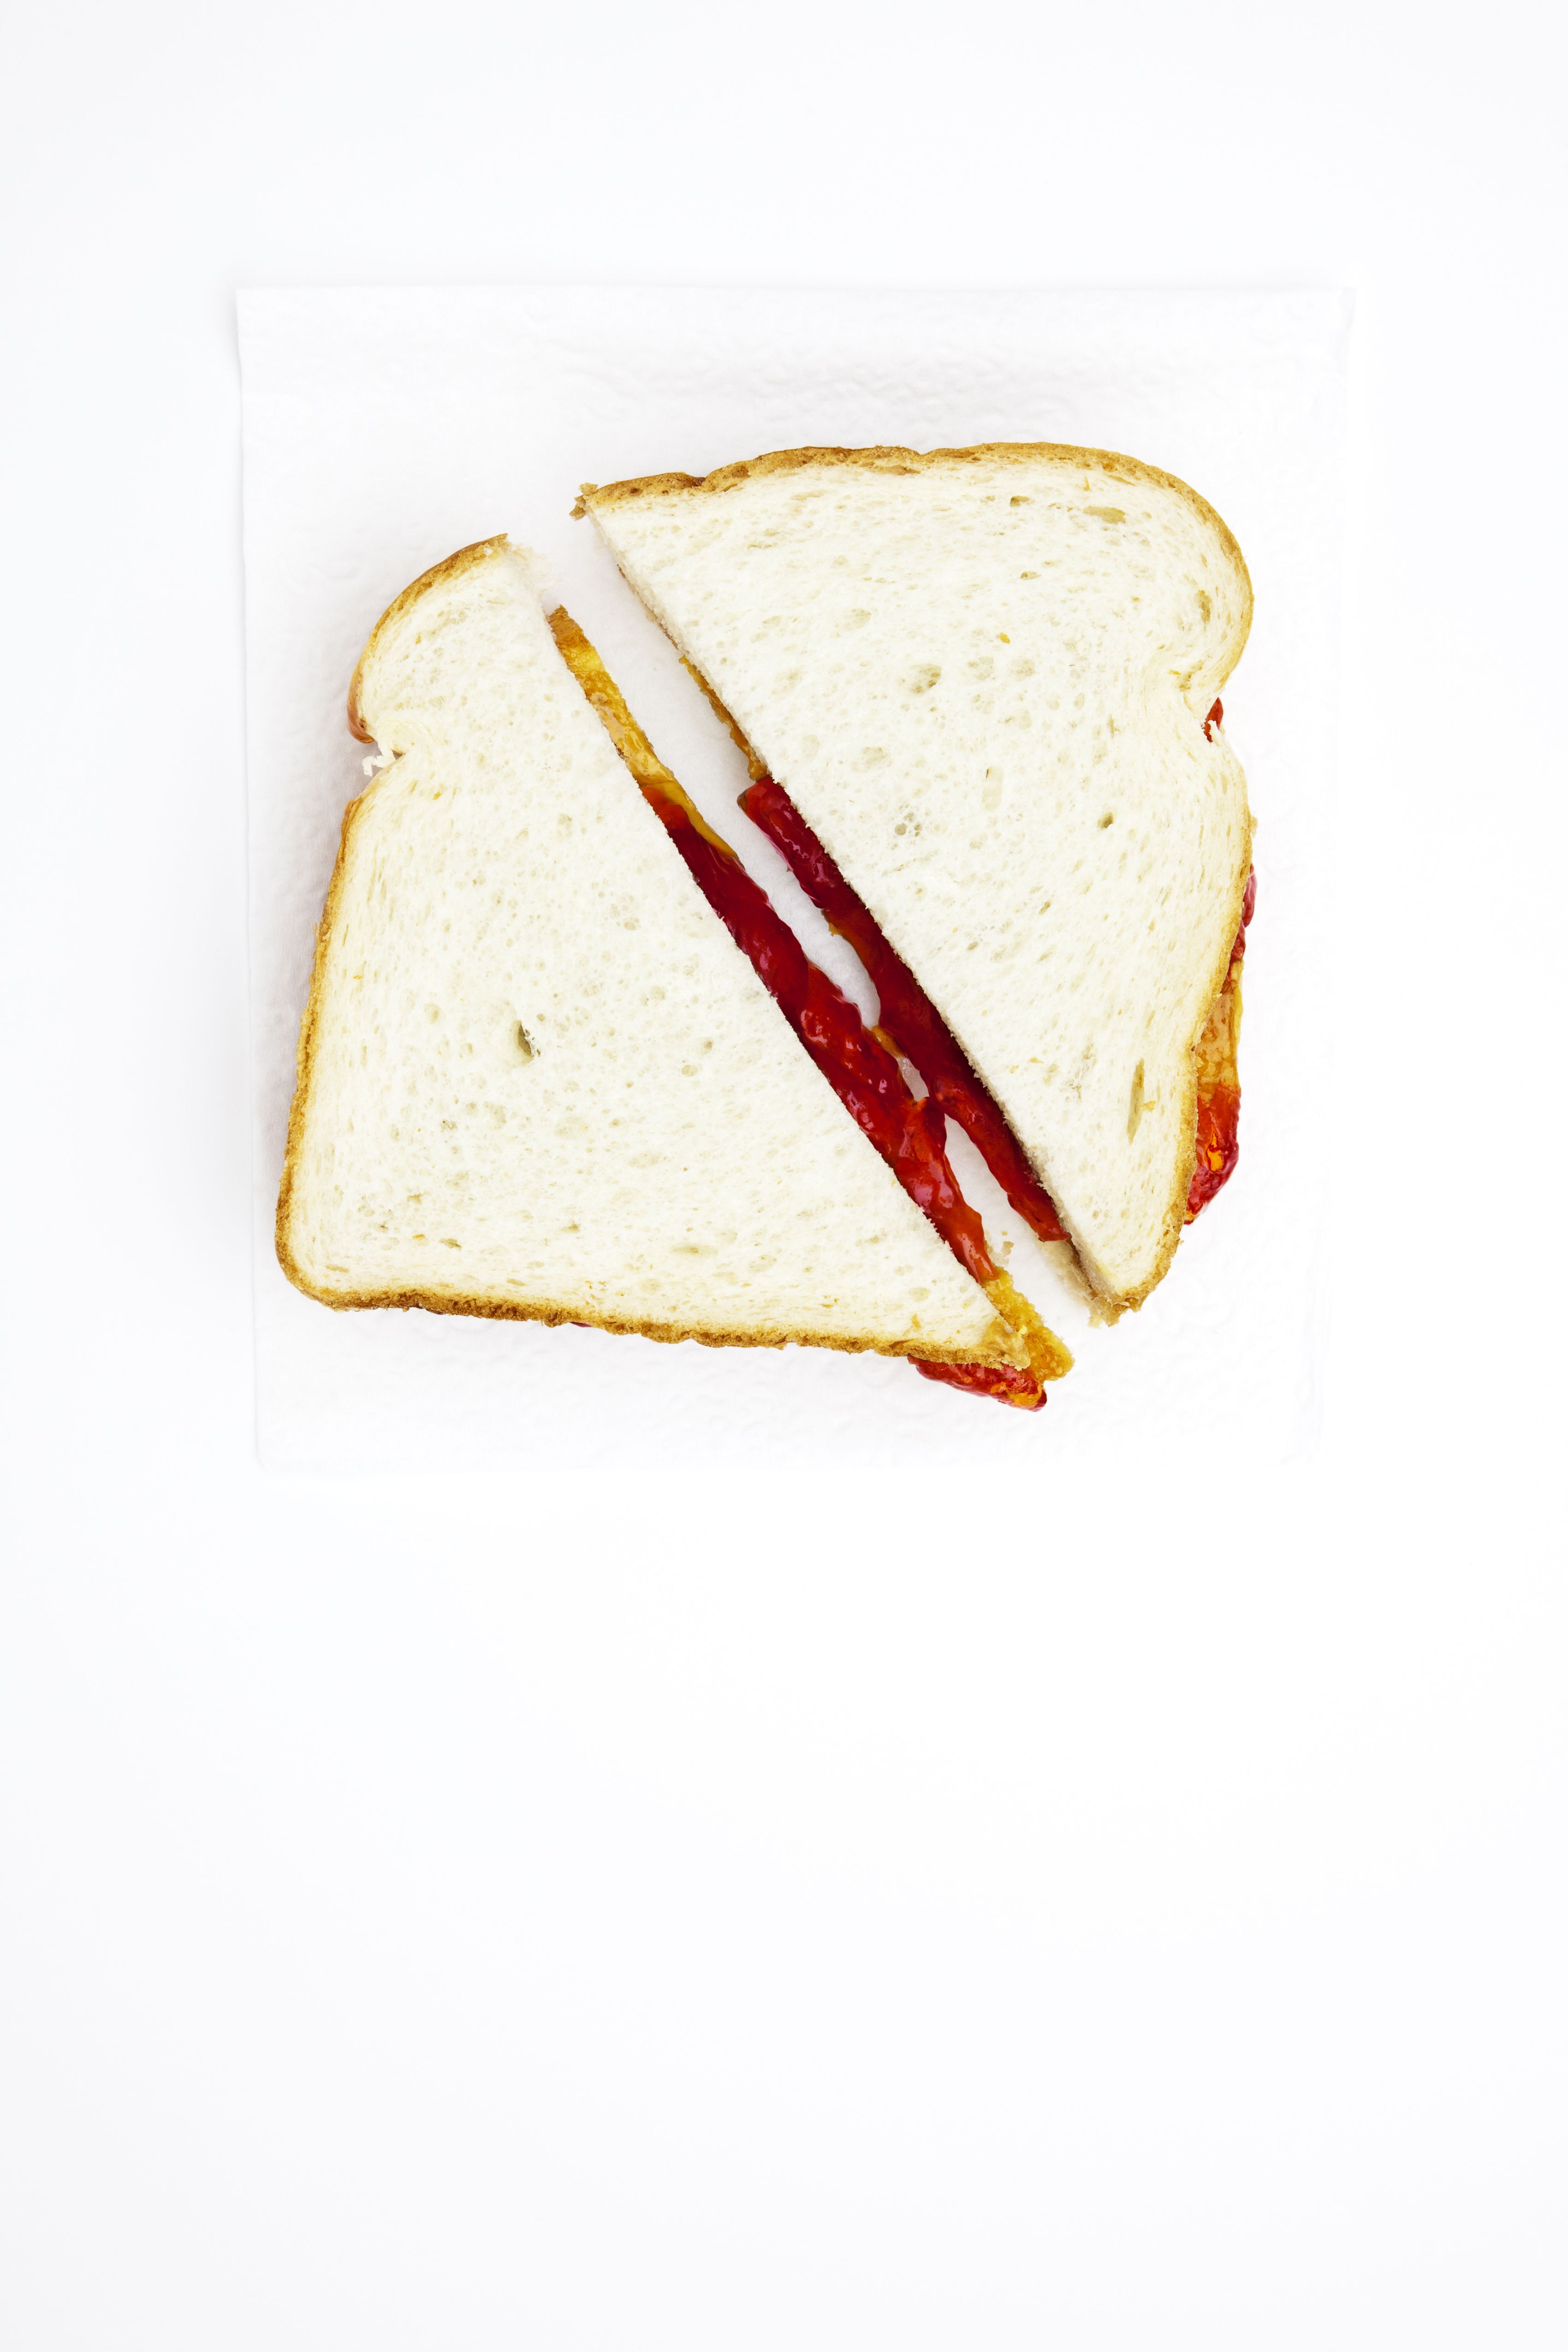 One peanut butter and jelly sandwich cut in half